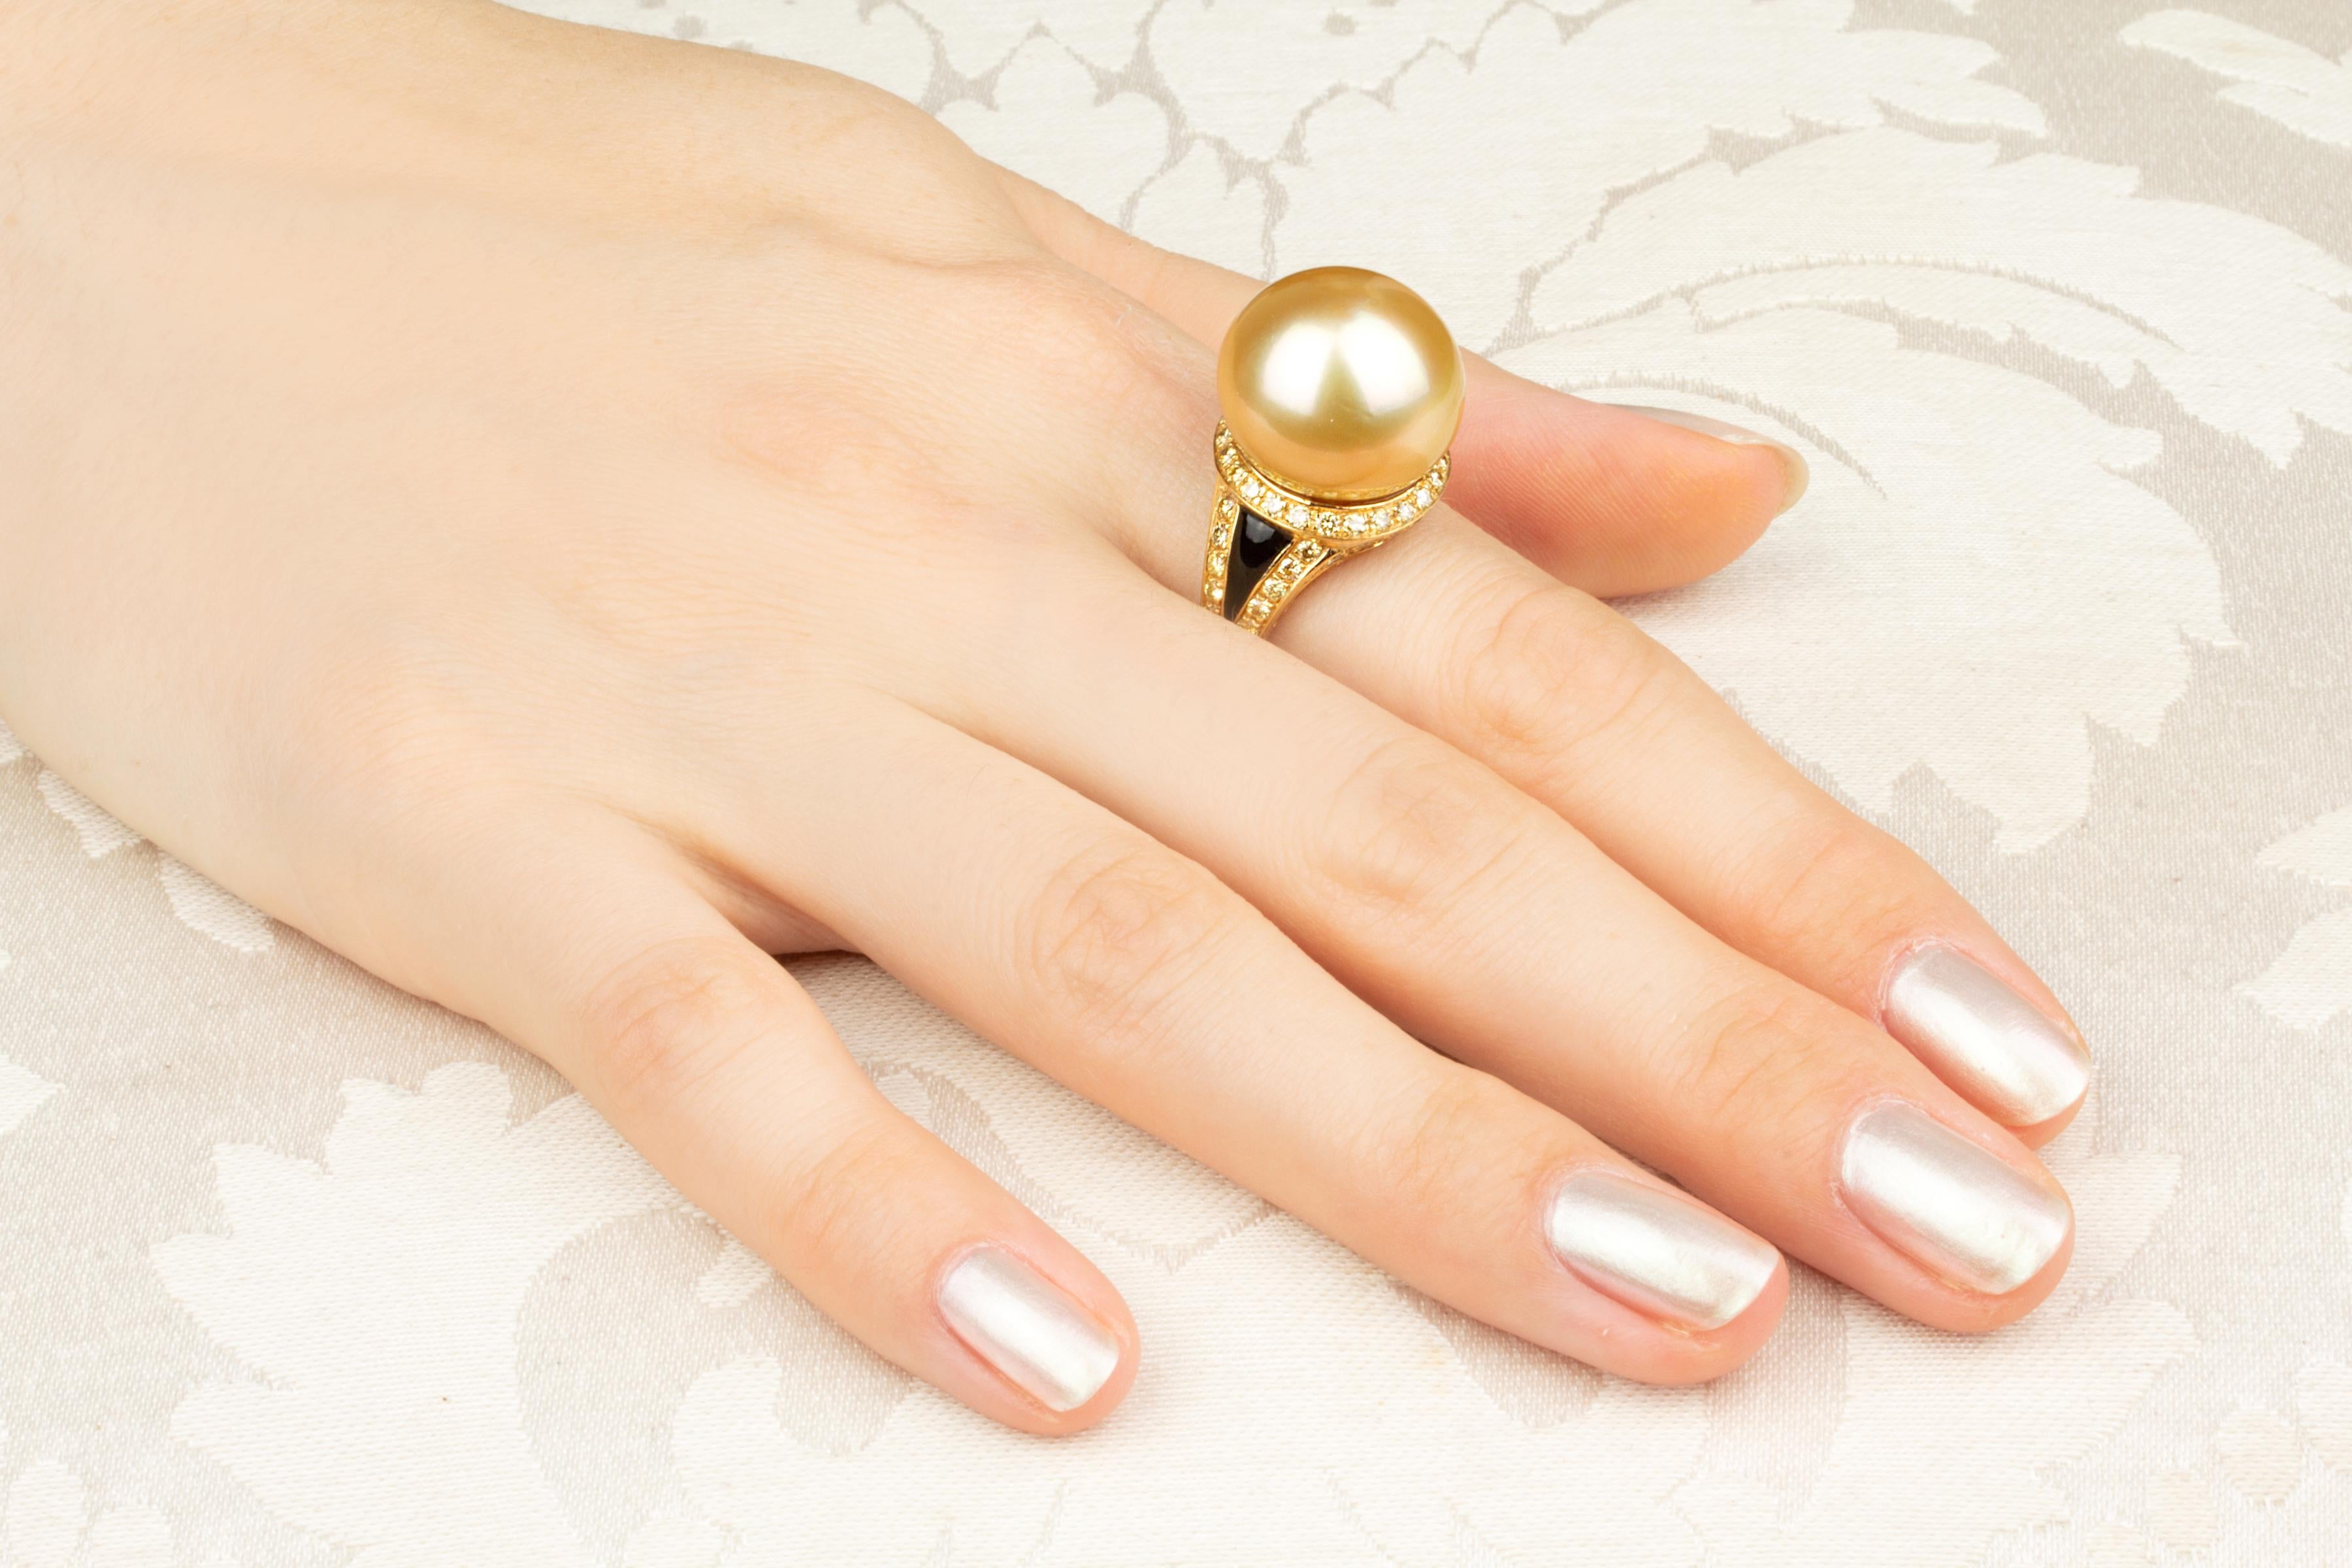 This golden pearl and diamond ring features a splendid pearl of 17mm diameter. The pearl is untreated. It displays fine nacre and its natural color and luster have not been enhanced in any way. The pearl is perched on a crown of round diamonds